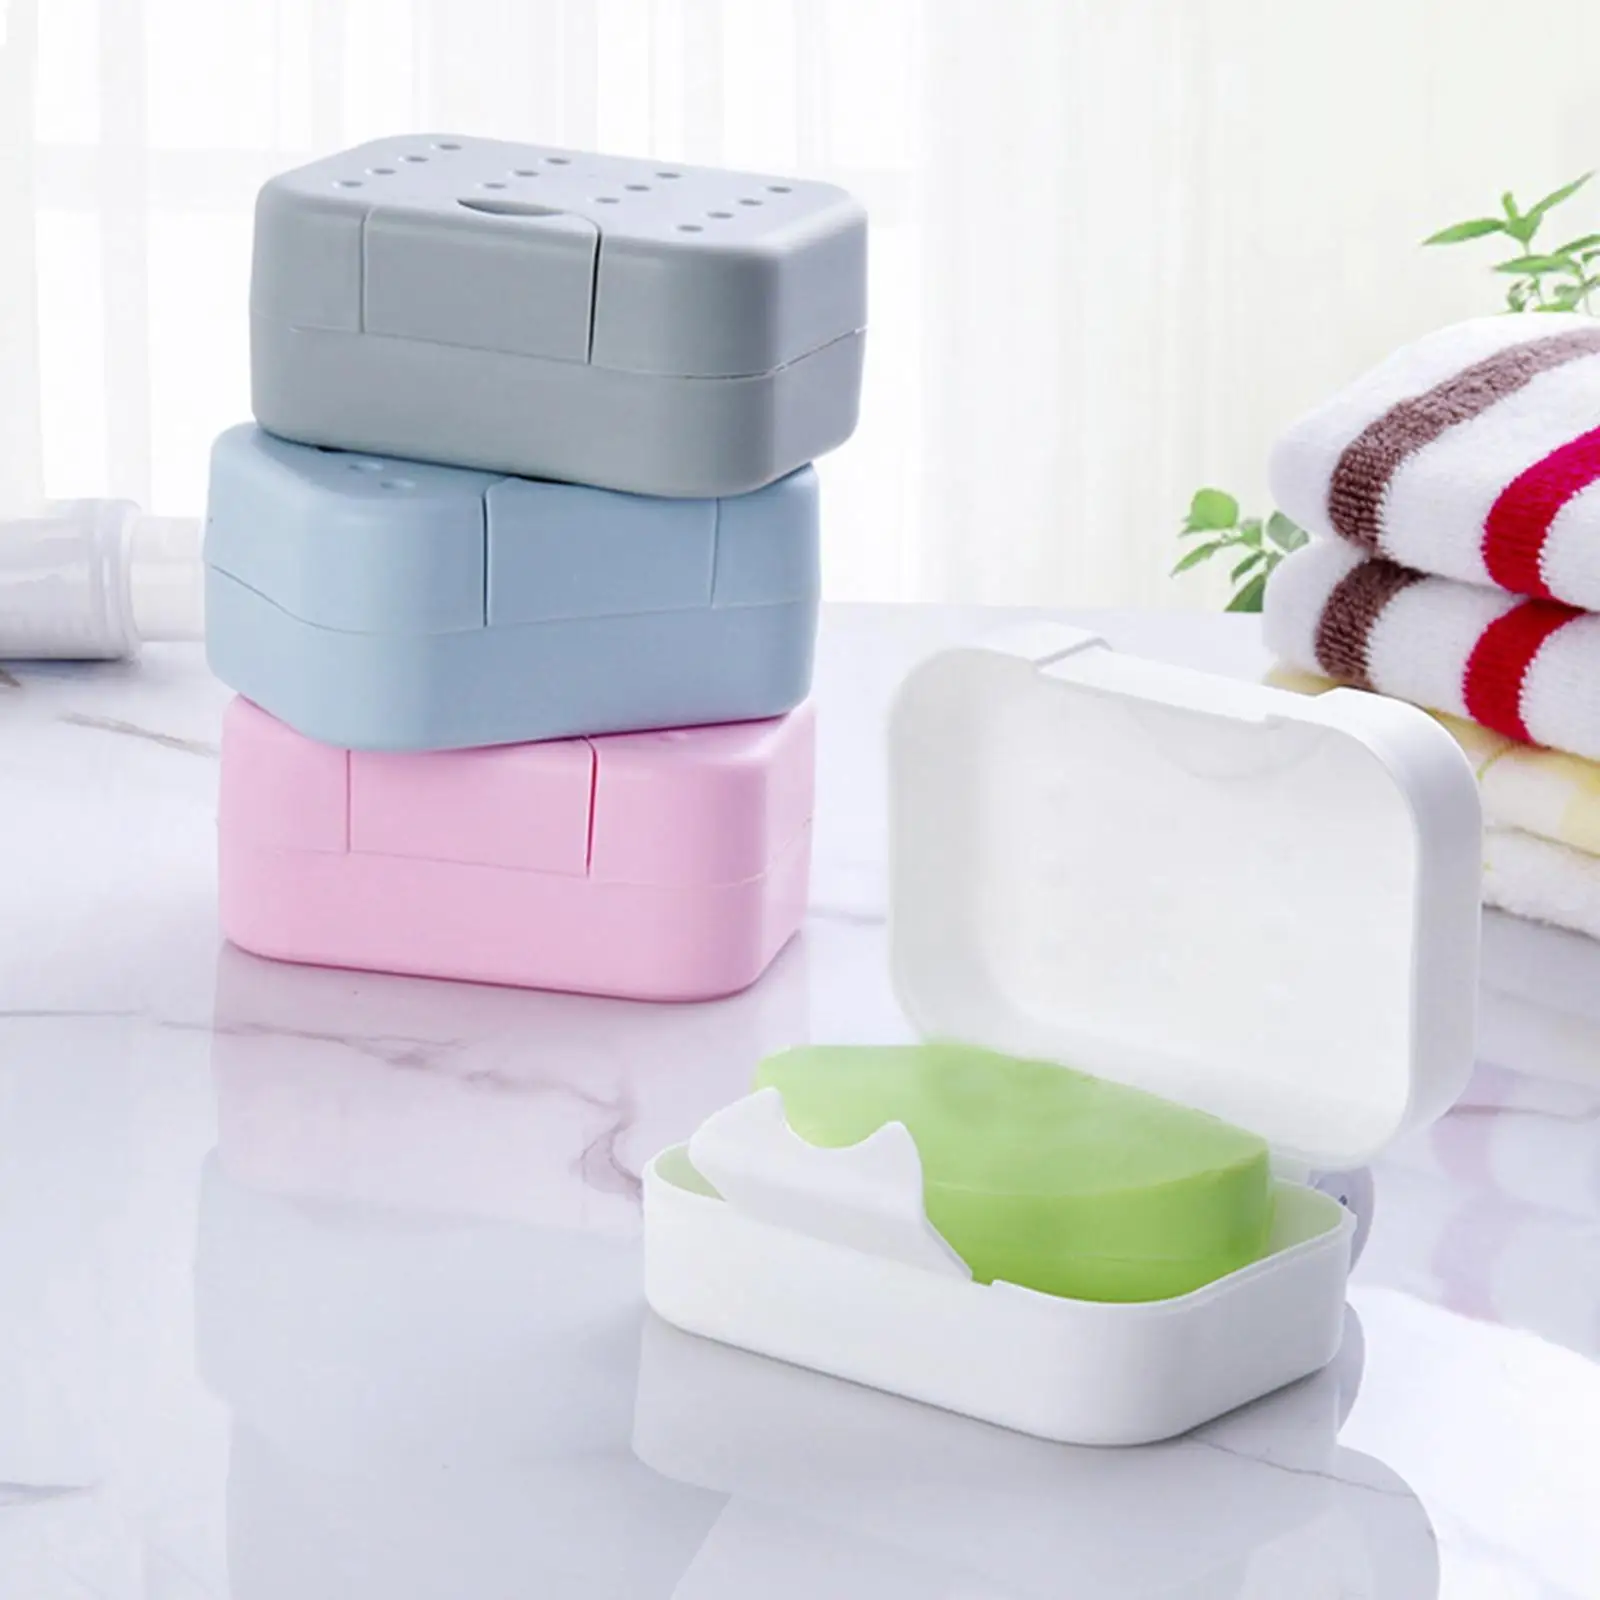 Portable Travel Soap Box Case Dish Container Soap Bar Holder for Hiking Bathroom Strong Sealing Leakproof with Sponge Saver